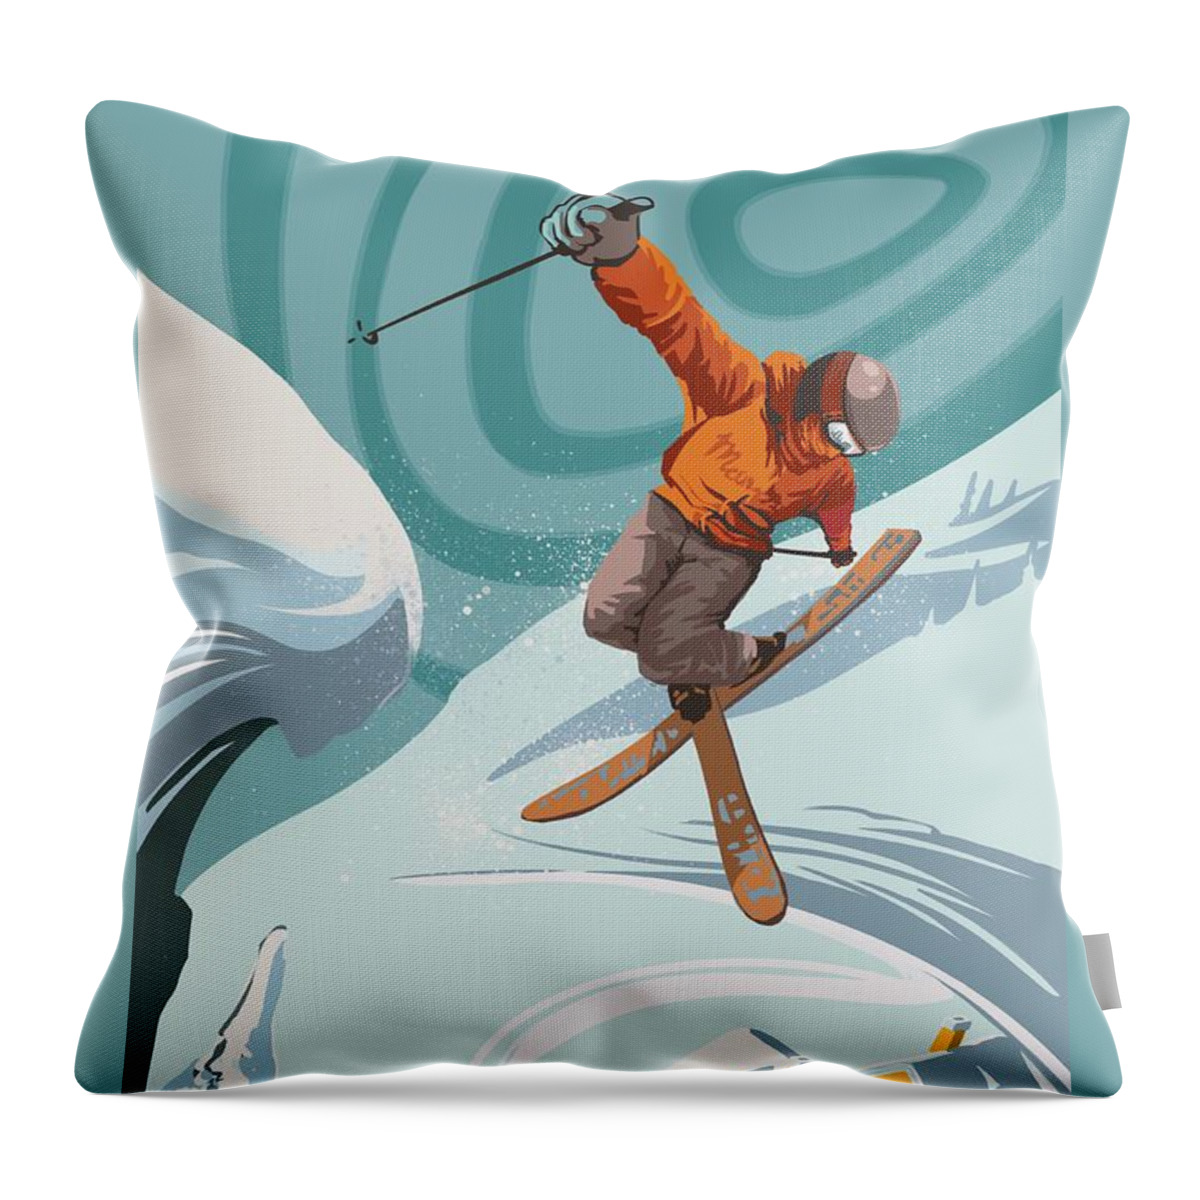 Skiing Throw Pillow featuring the painting Ski Freestyler by Sassan Filsoof